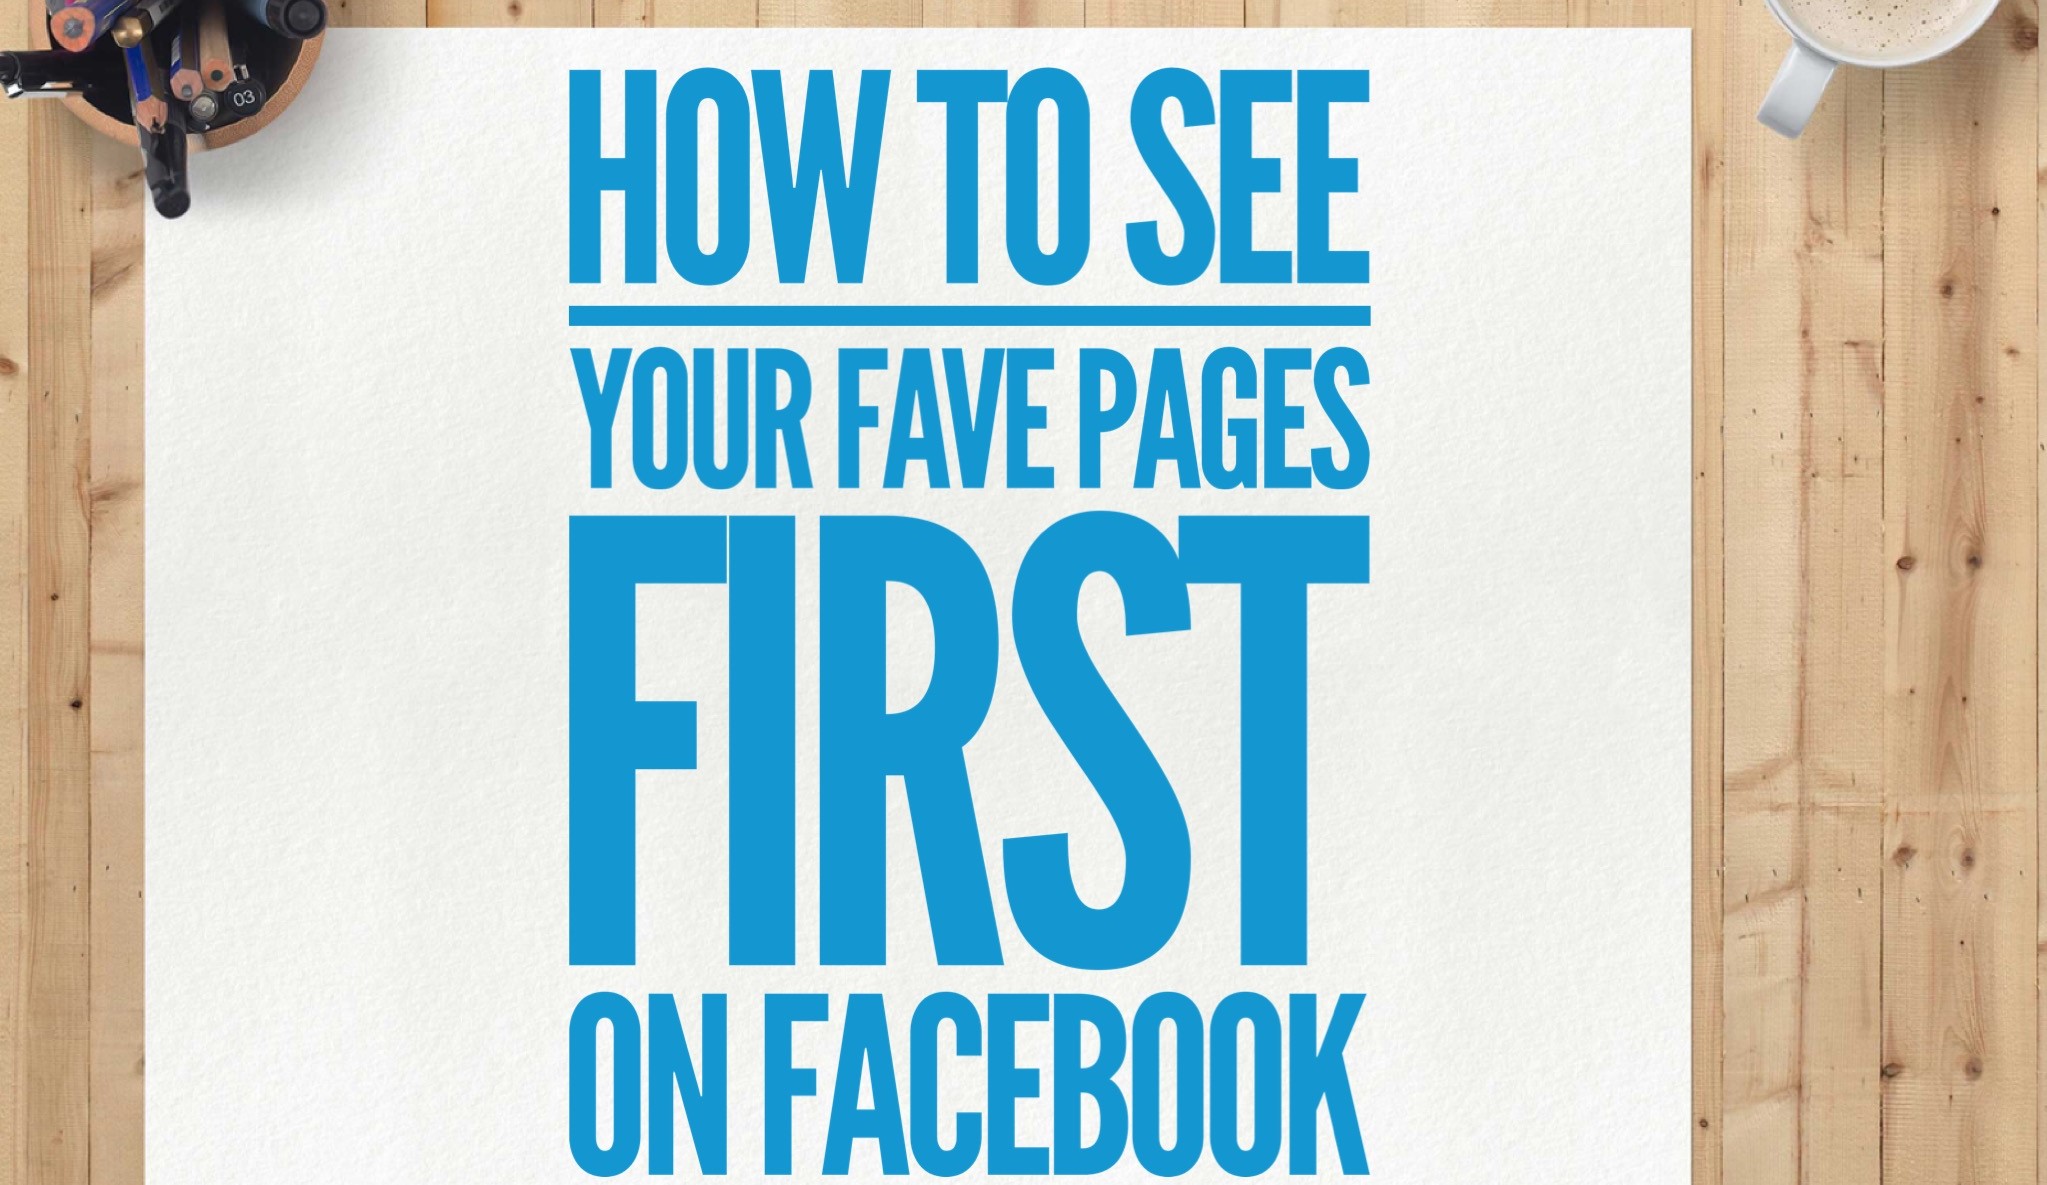 How to see your favourite pages first on Facebook